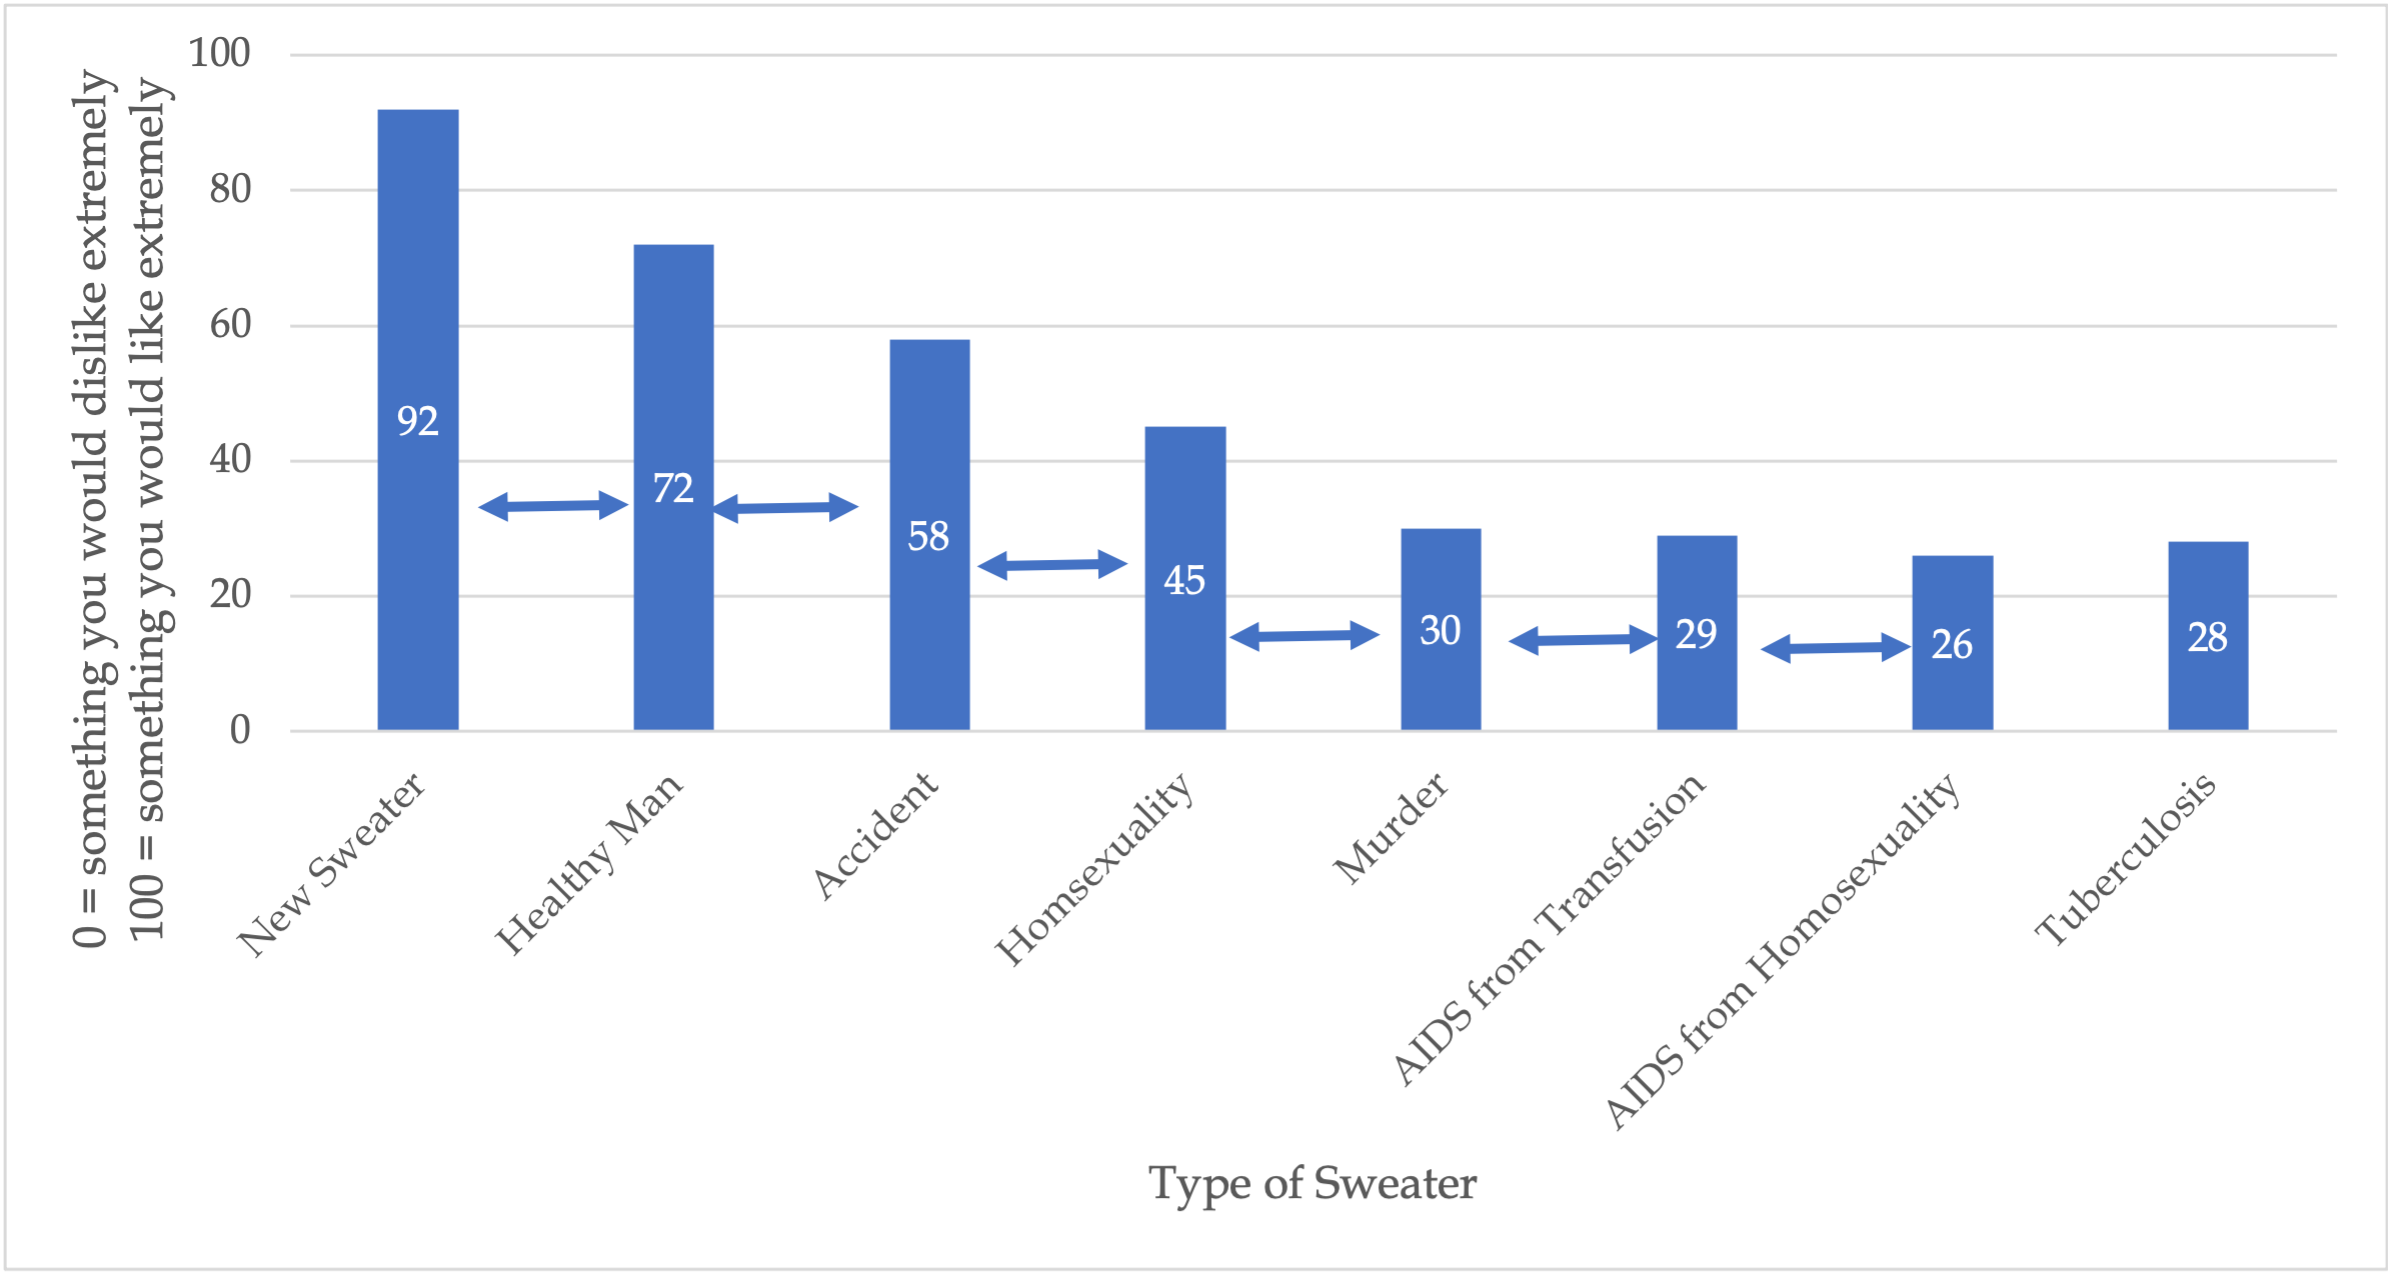 A bar graph with 8 bars measuring desire to wear a sweater worn by a male stranger with various experiences on scale of 0 (dislike) to 100 (like). Those experiences are: New sweater(92), healthy man(72), accident(58), homosexuality(45), murder(30), AIDS from Transfusion(29), AIDS from homosexuality(26), and tuberculosis(28).